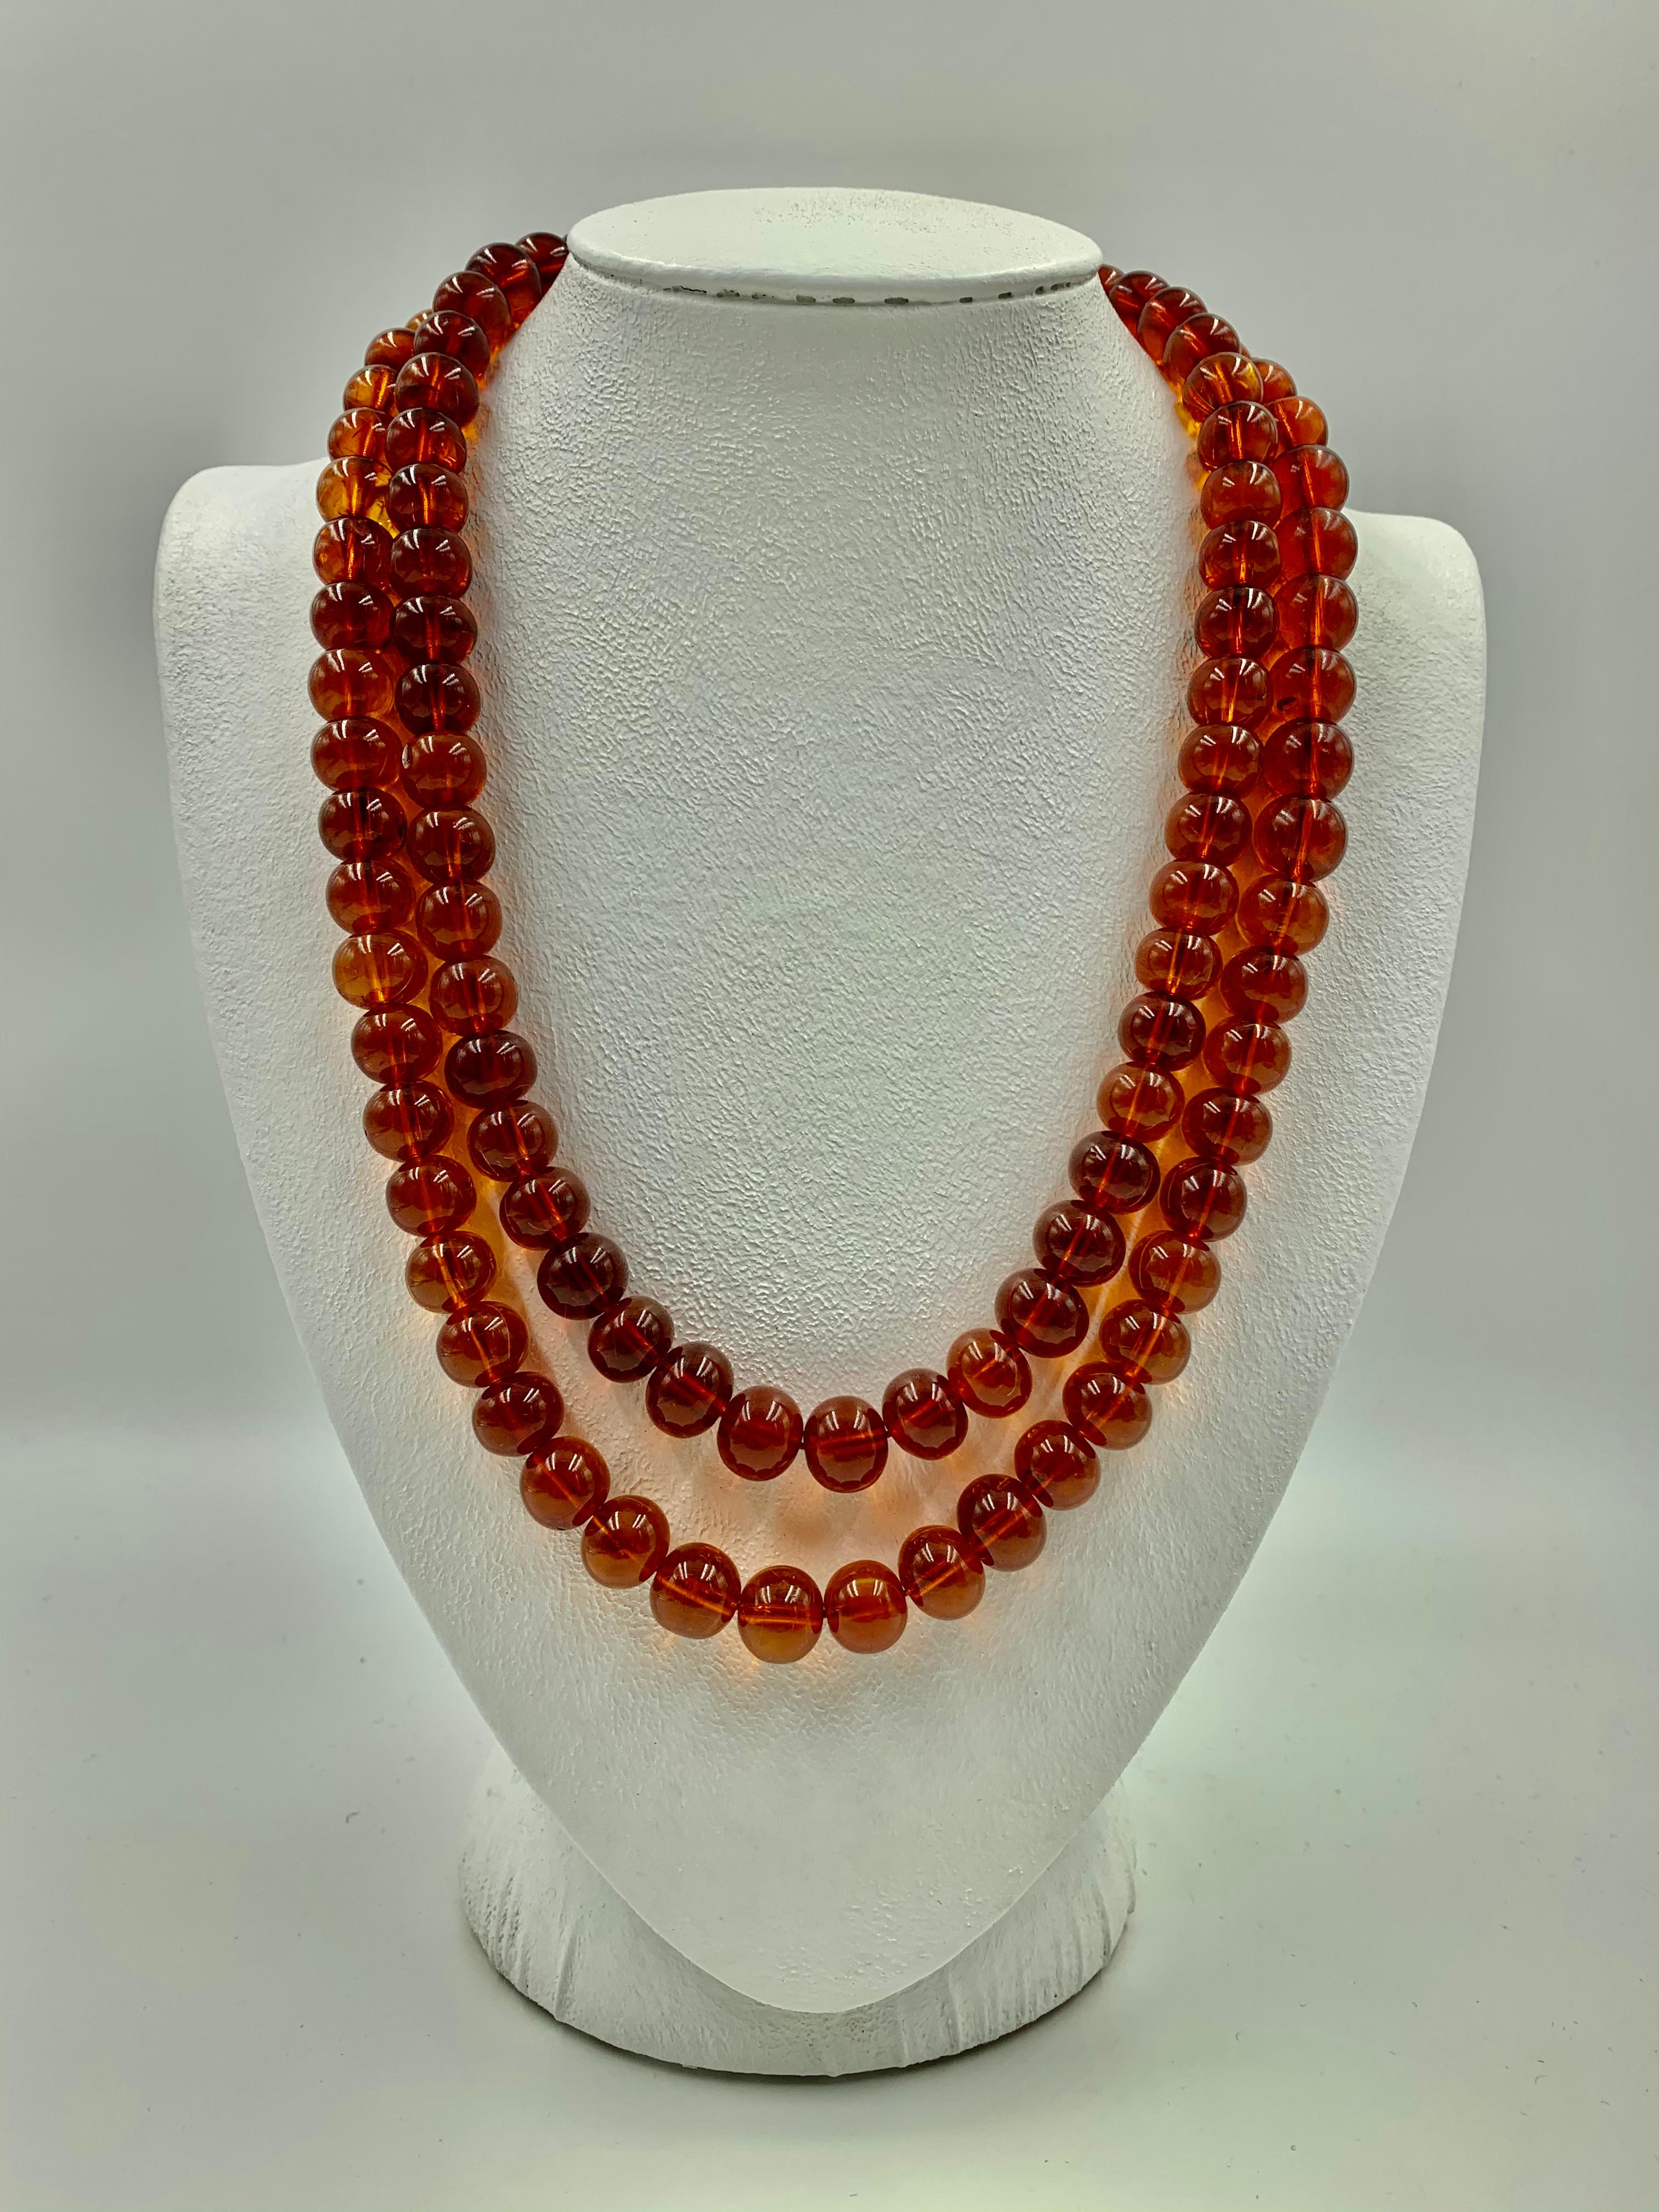 Antique Chinese Amber Court Necklace or Mala, 19th Century 2